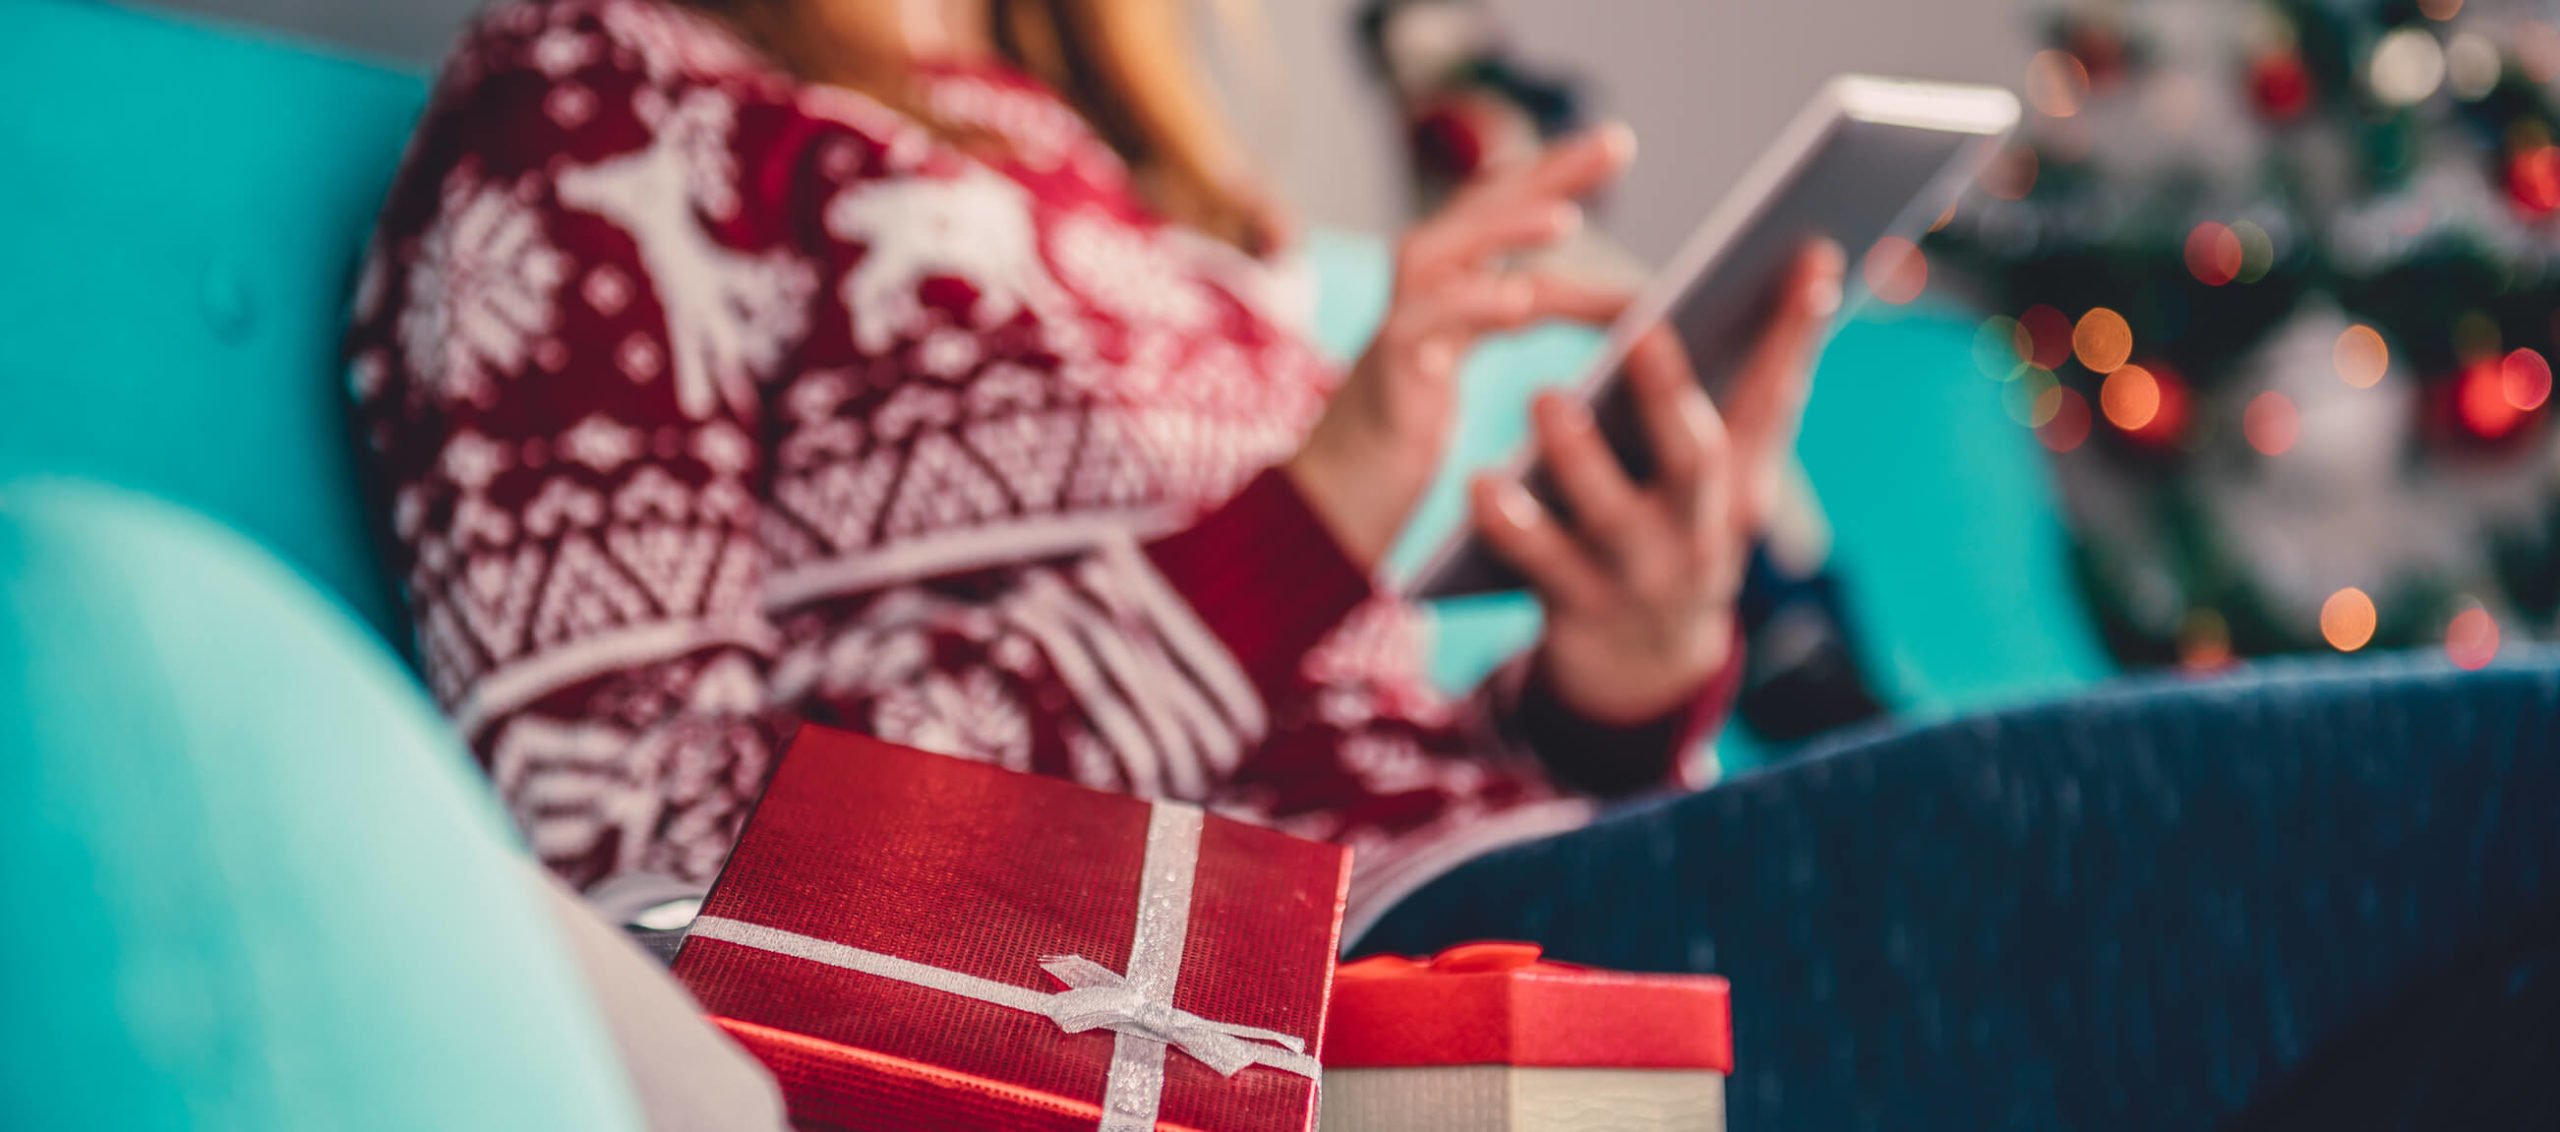 Teens and Tweens: A Guide to Holiday Gifts